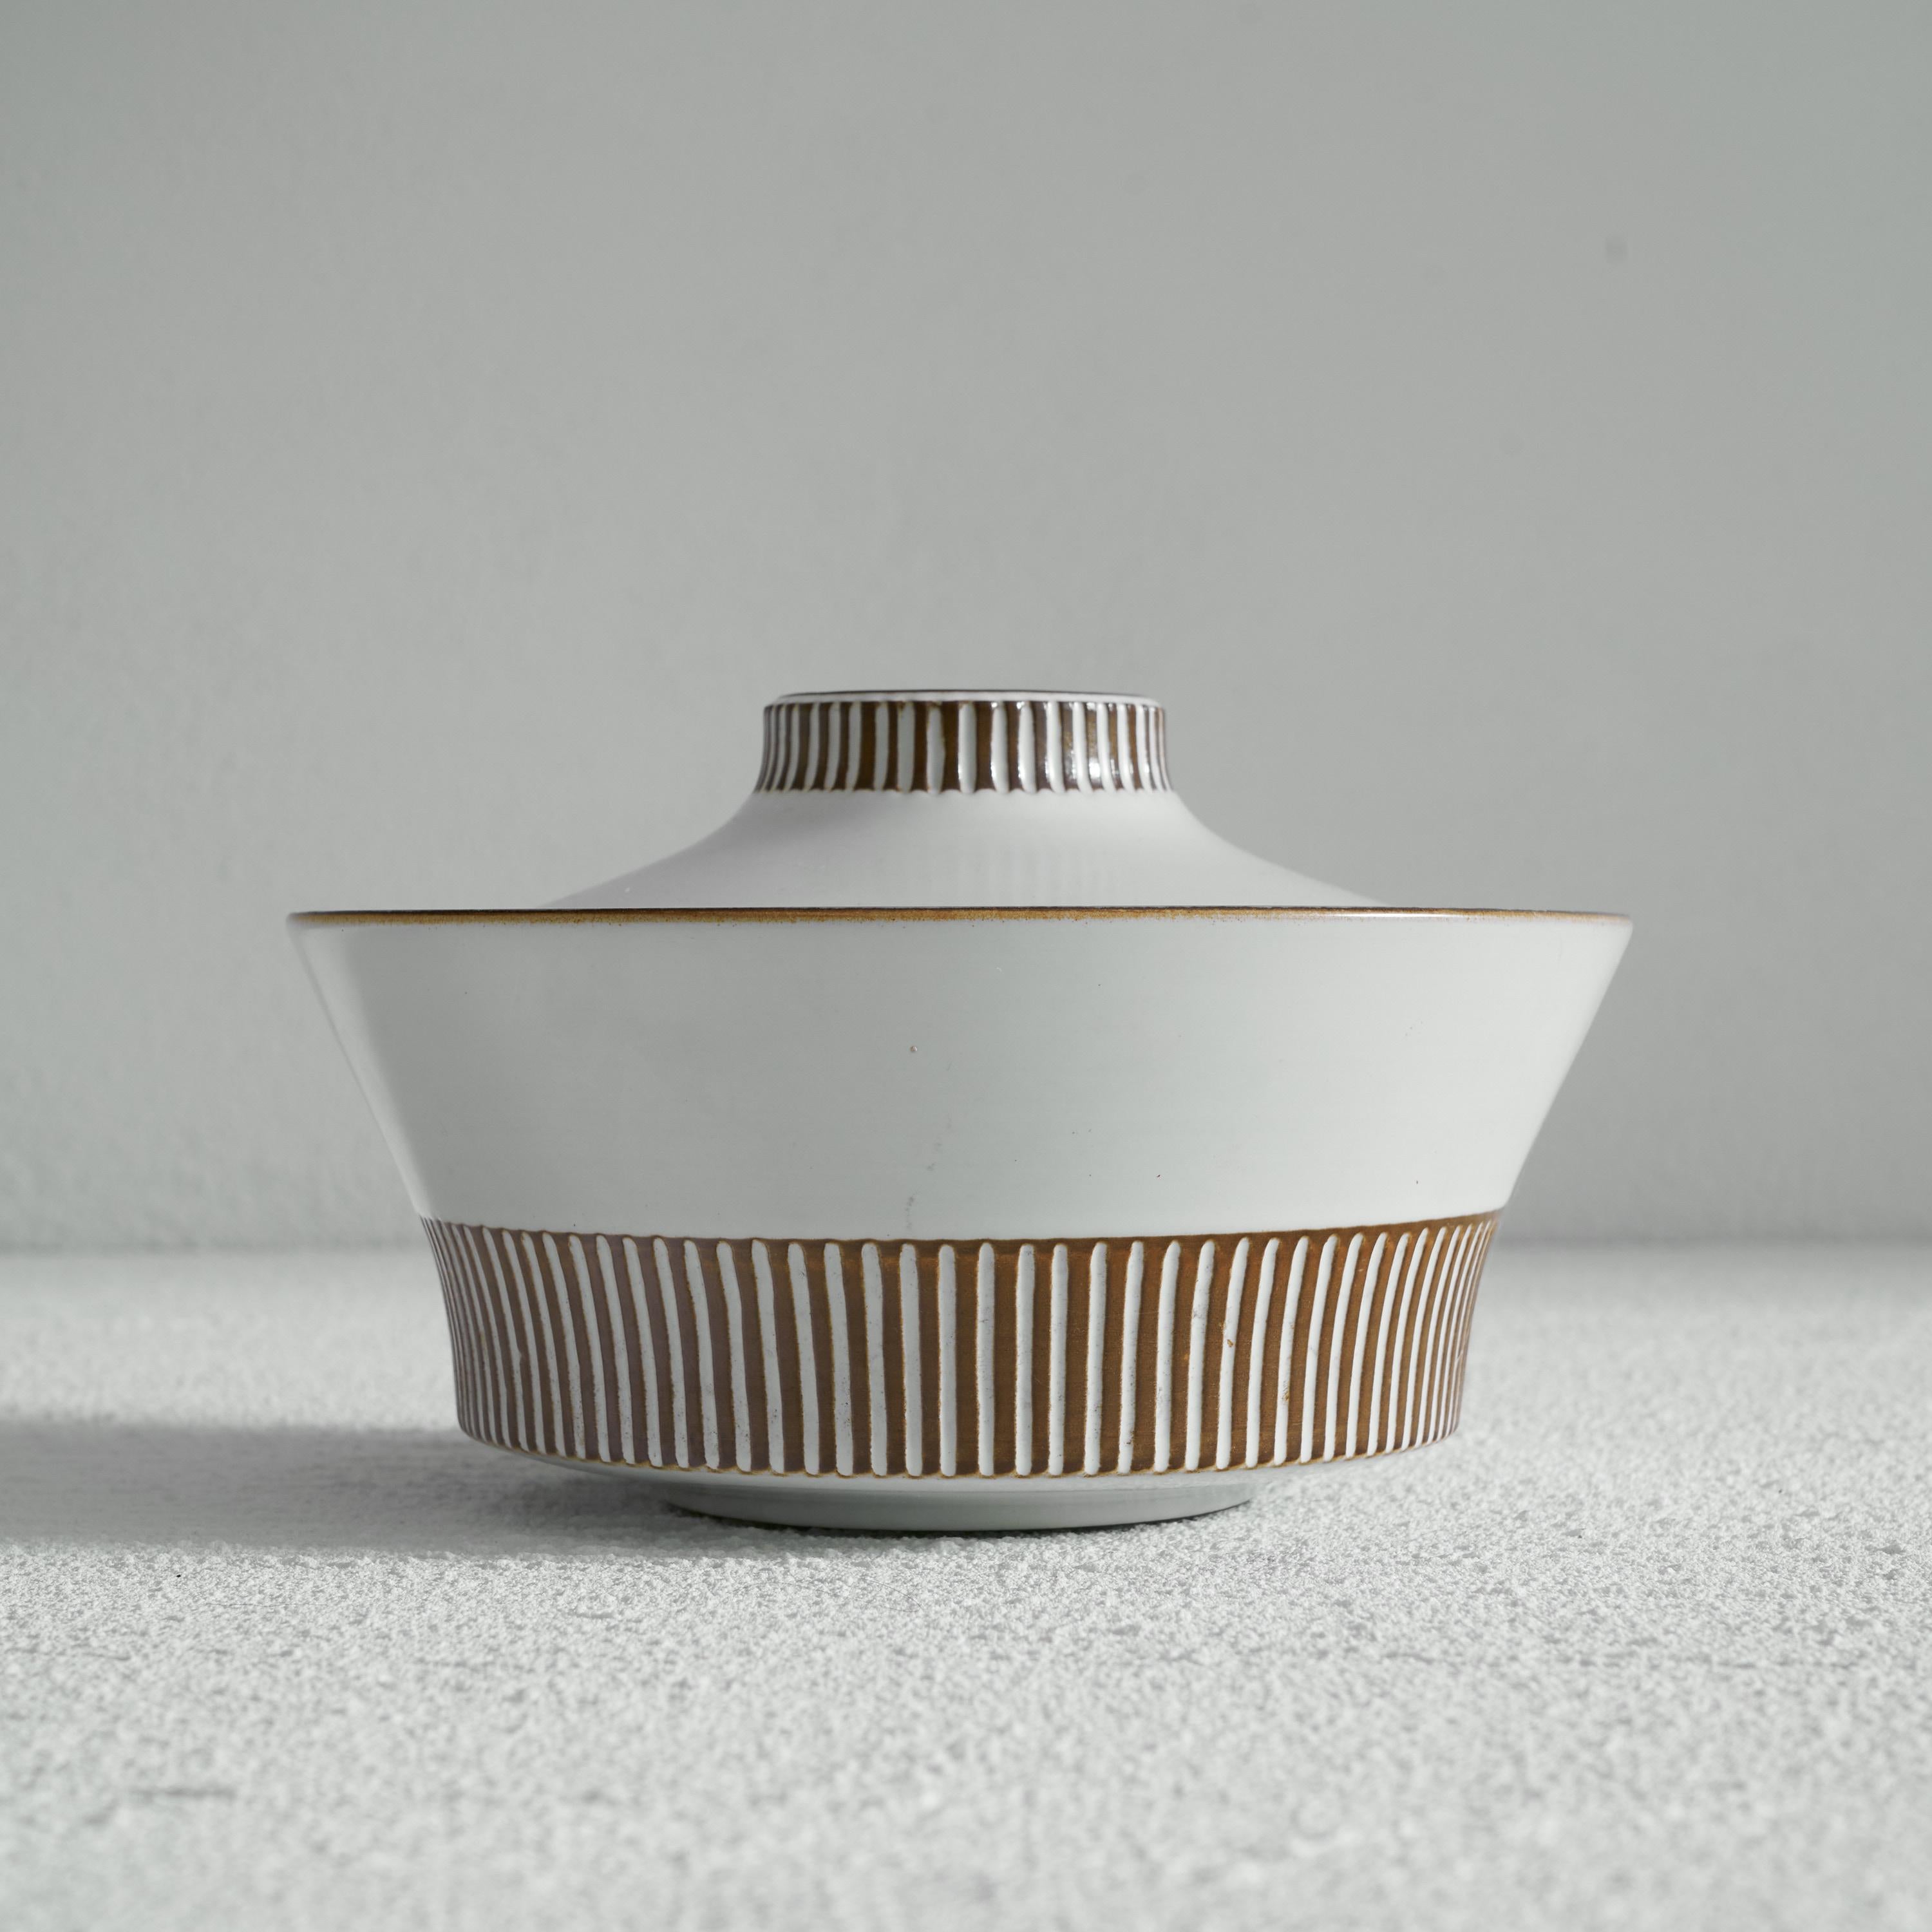 Willem de Vries (1908-1969) Mid-Century Modern 'Cleopatra' Lidded Bowl for Fris Edam. Holland, 1961.

This is very distinct piece of Dutch mid-century modern pottery. Designed by Willem de Vries, who was chief designer at the Fris pottery workshop